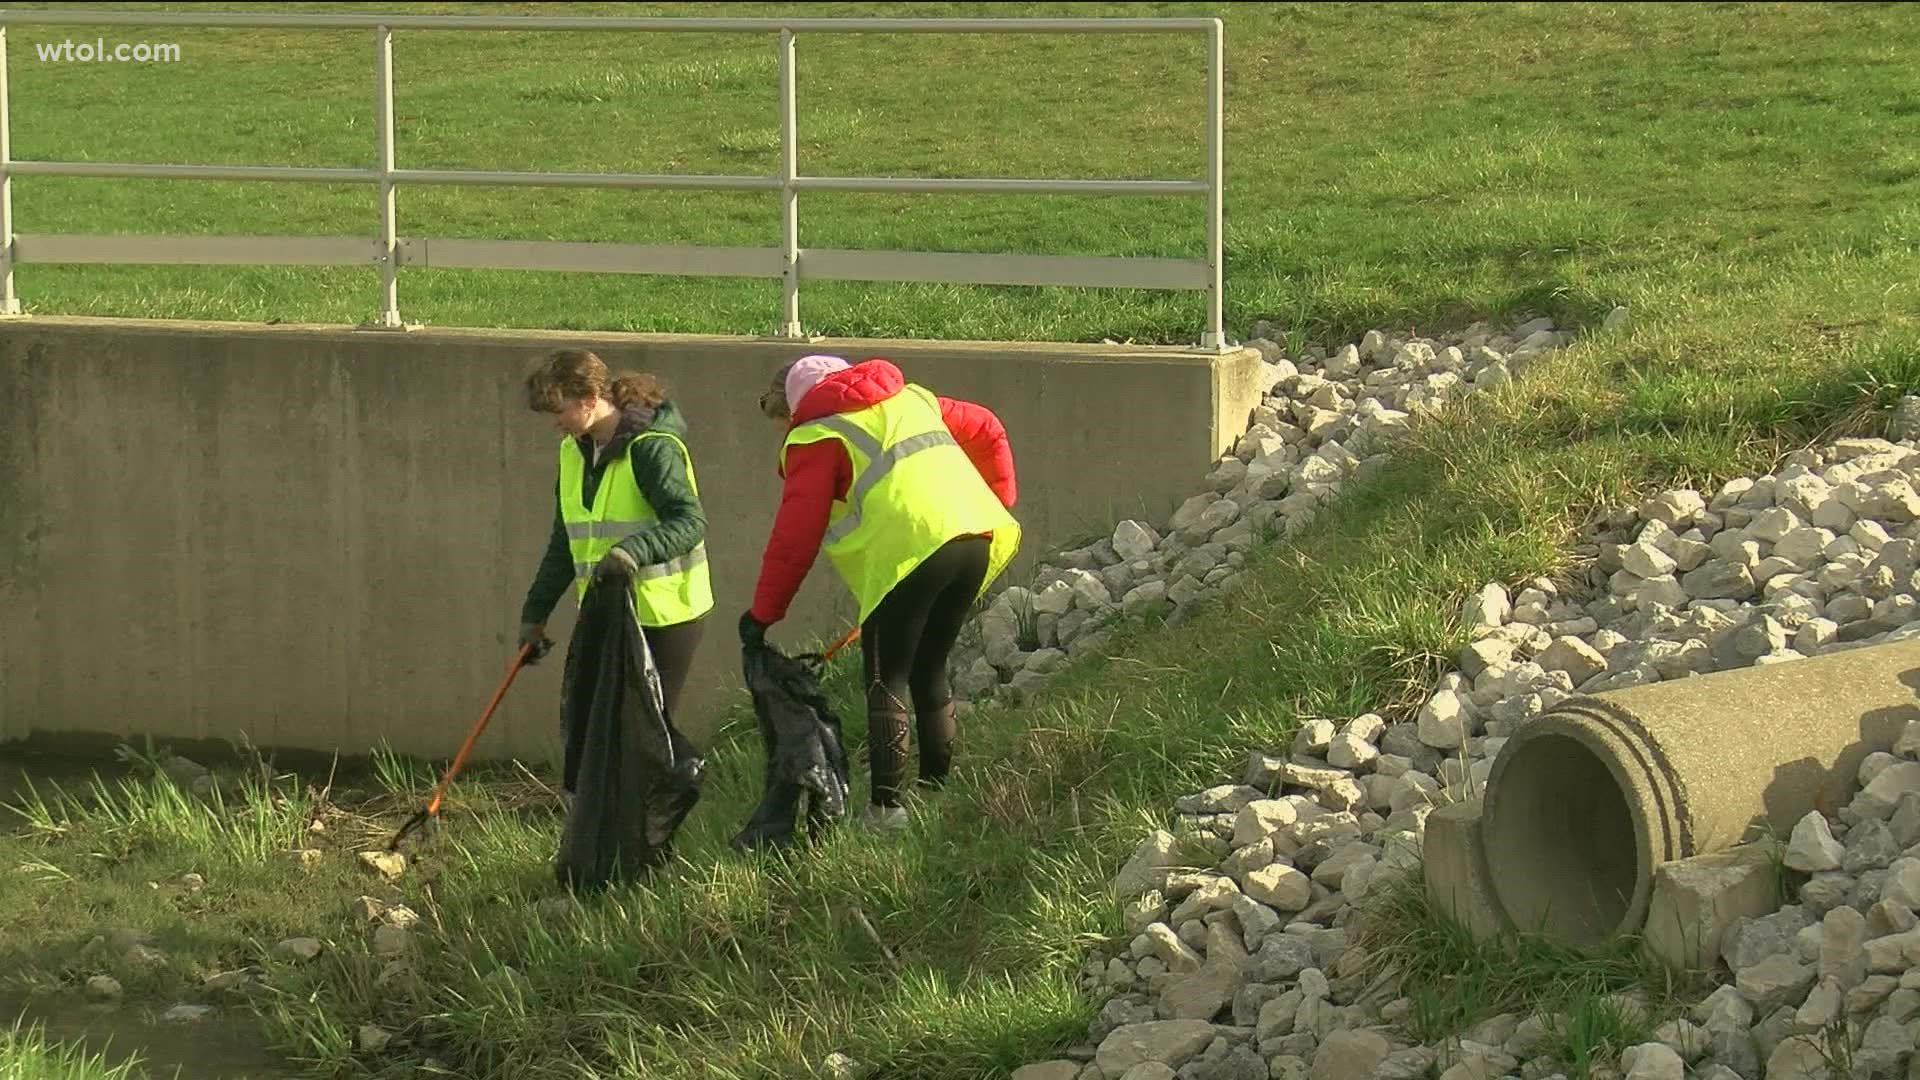 Volunteers are needed for six more cleanup events planned in Perrysburg through the end of May.